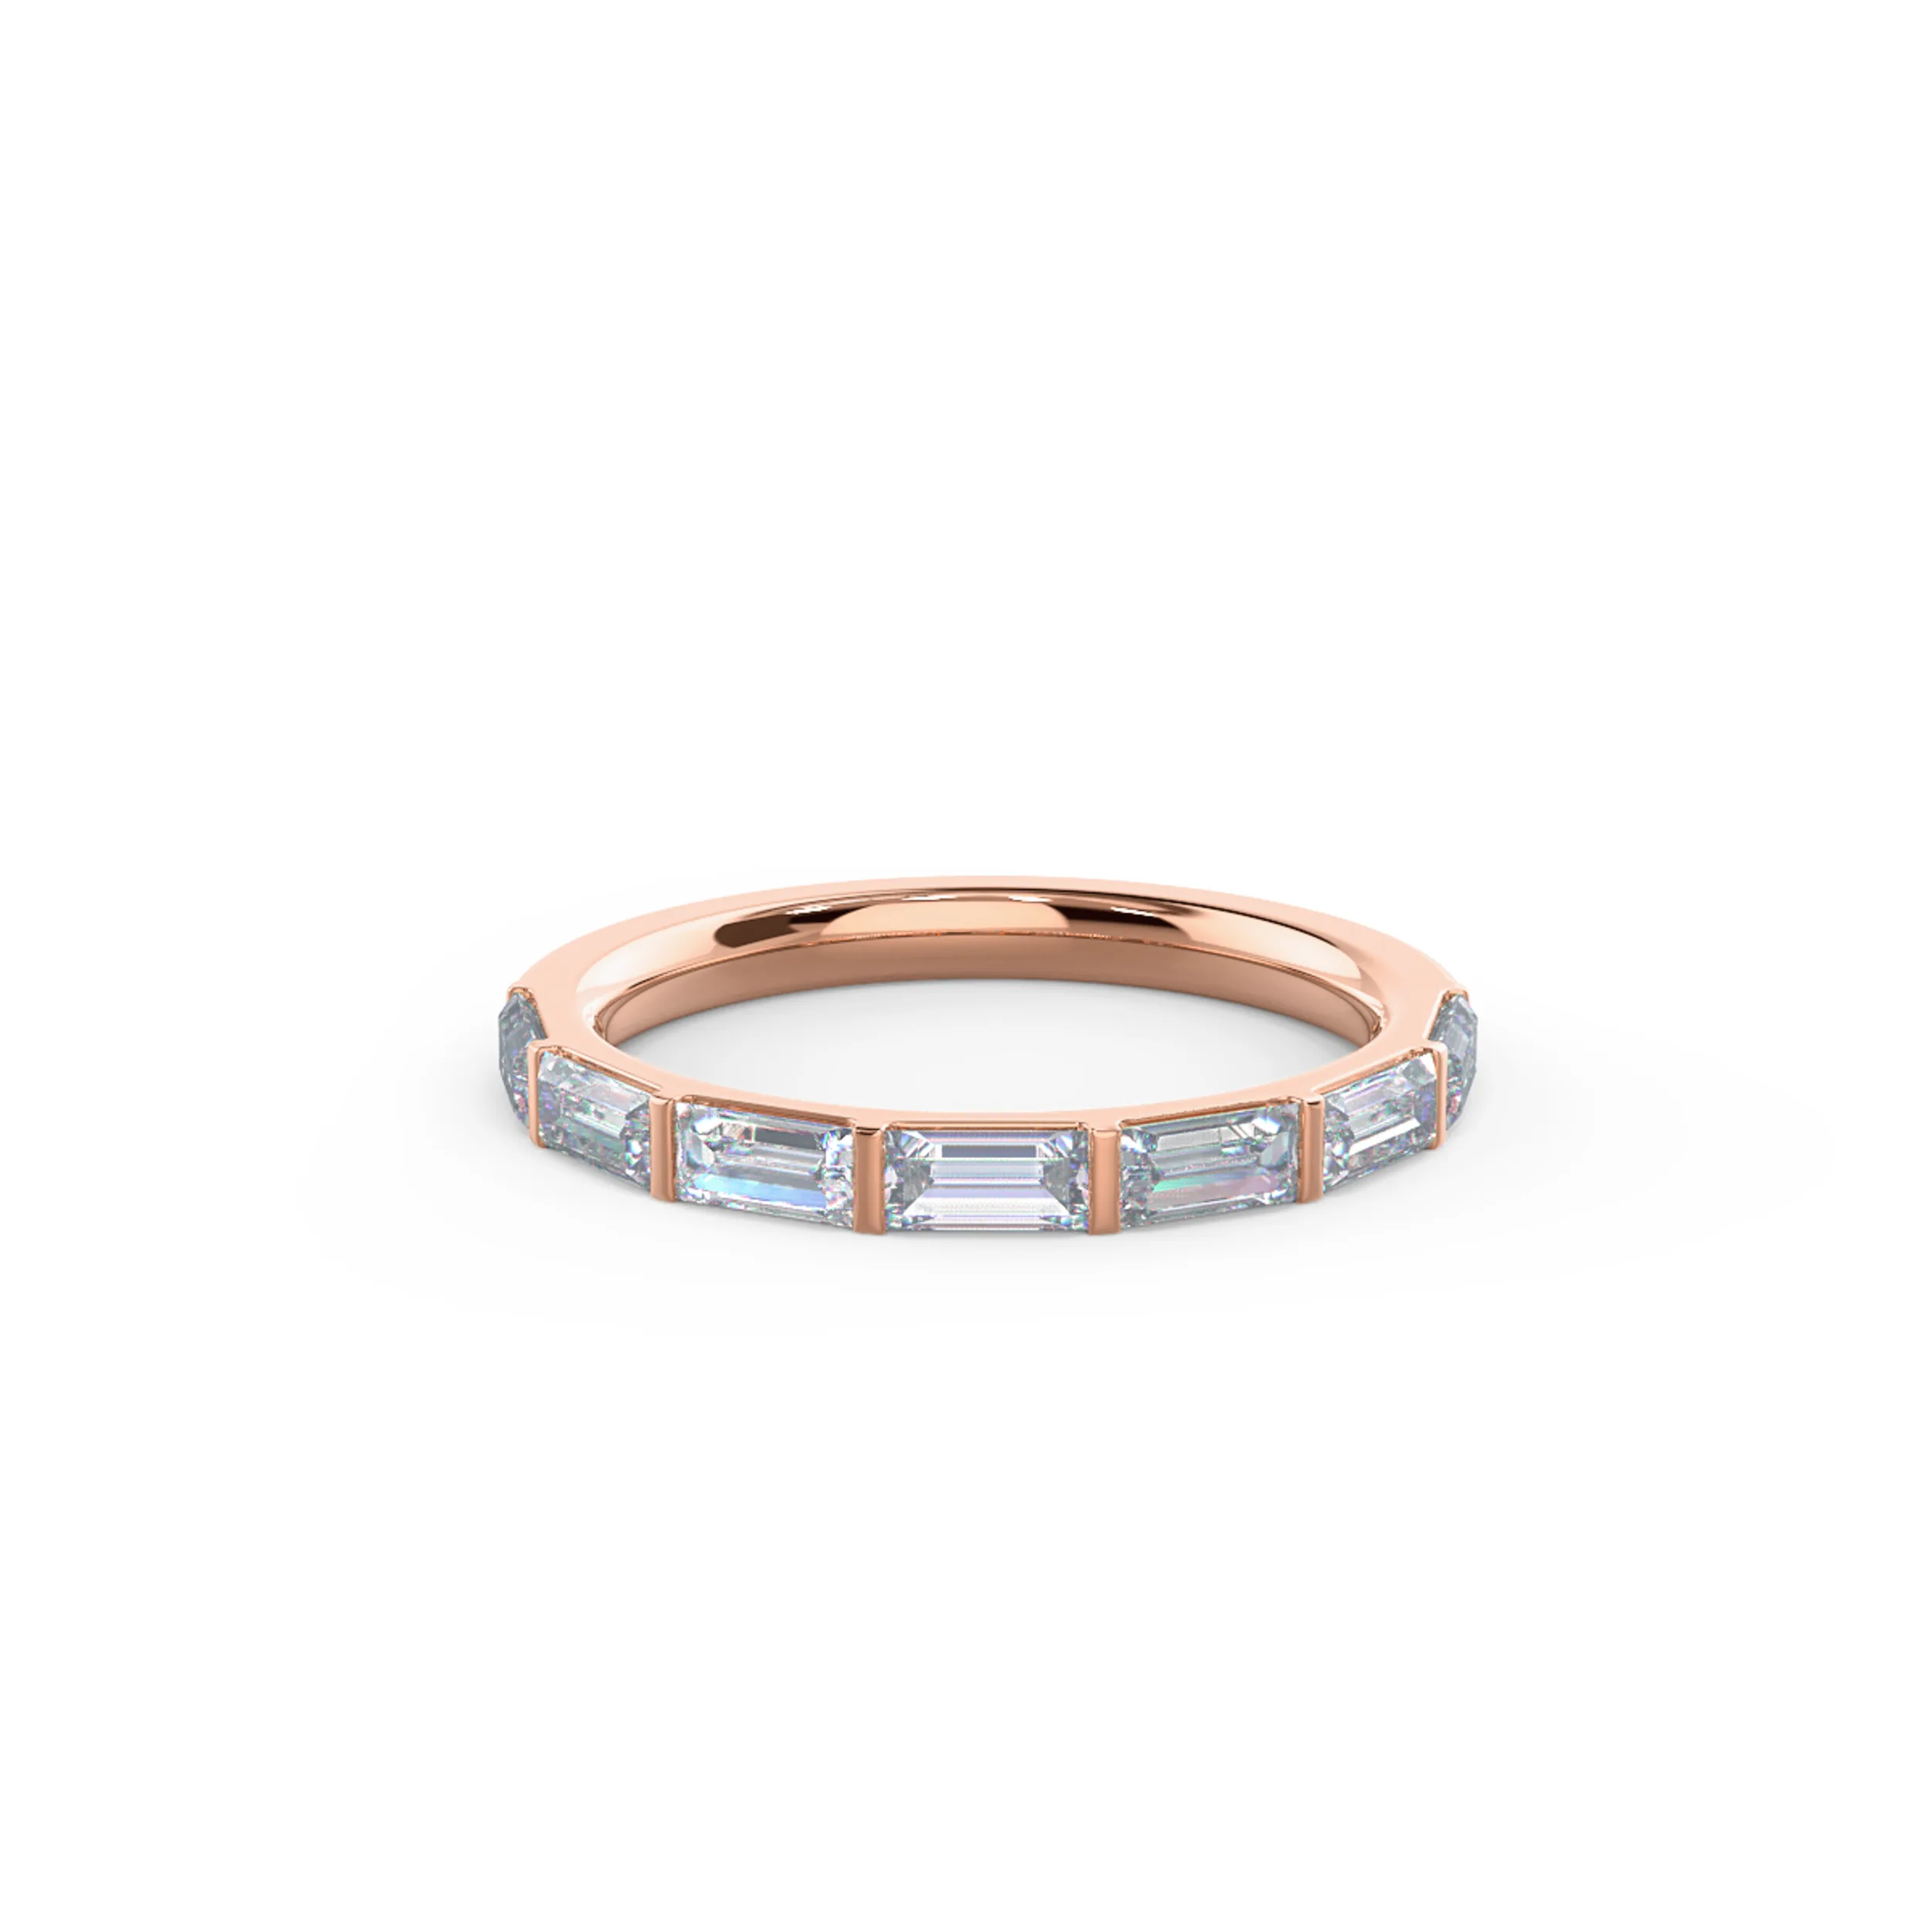 0.7 ct Diamonds set in 14k Rose Gold Baguette East-West Seven Stone (Main View)